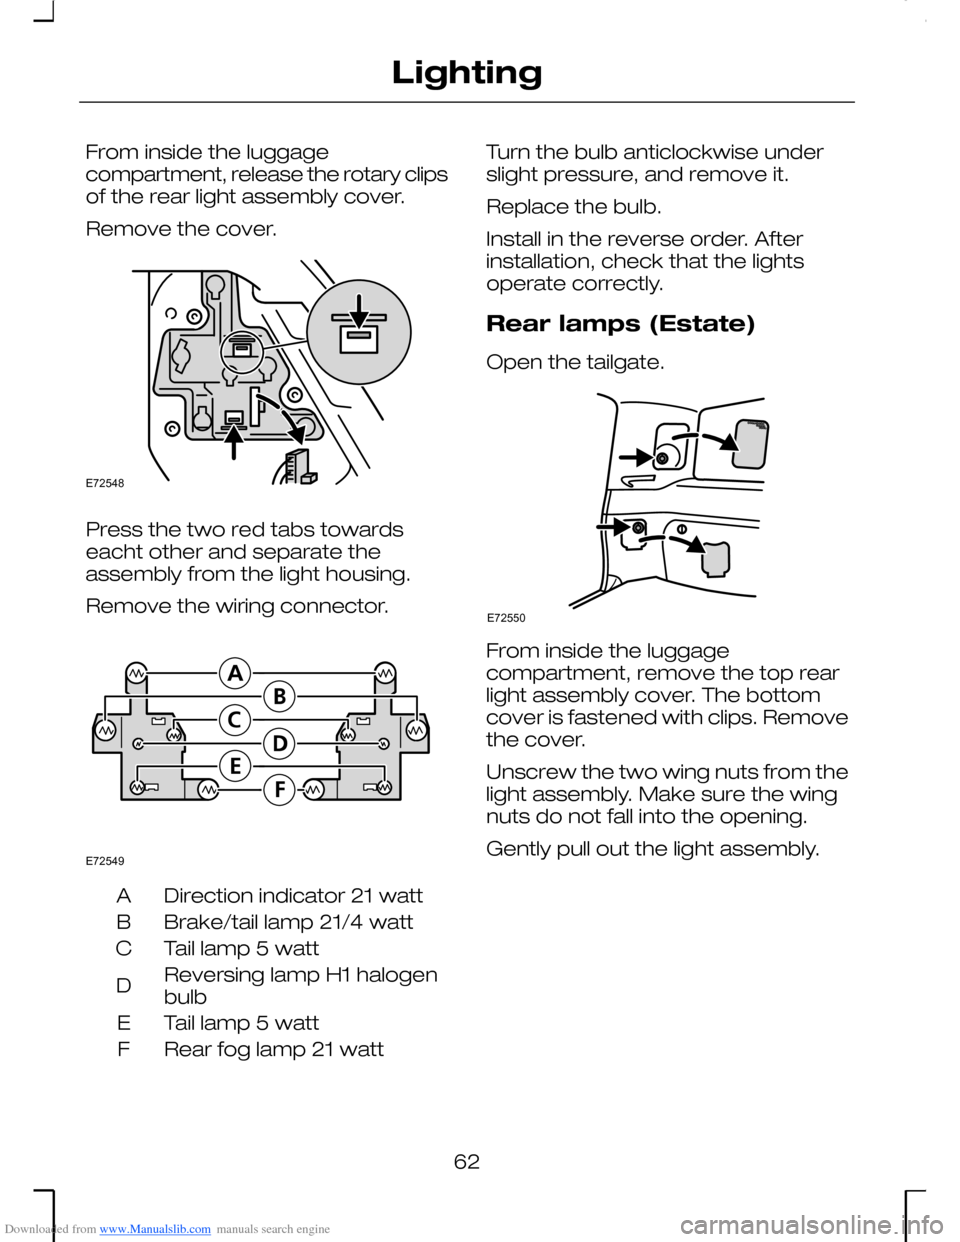 FORD MONDEO 2006 2.G Owners Manual Downloaded from www.Manualslib.com manuals search engine From inside the luggagecompartment, release the rotary clipsof the rear light assembly cover.
Remove the cover.
Press the two red tabs towardse